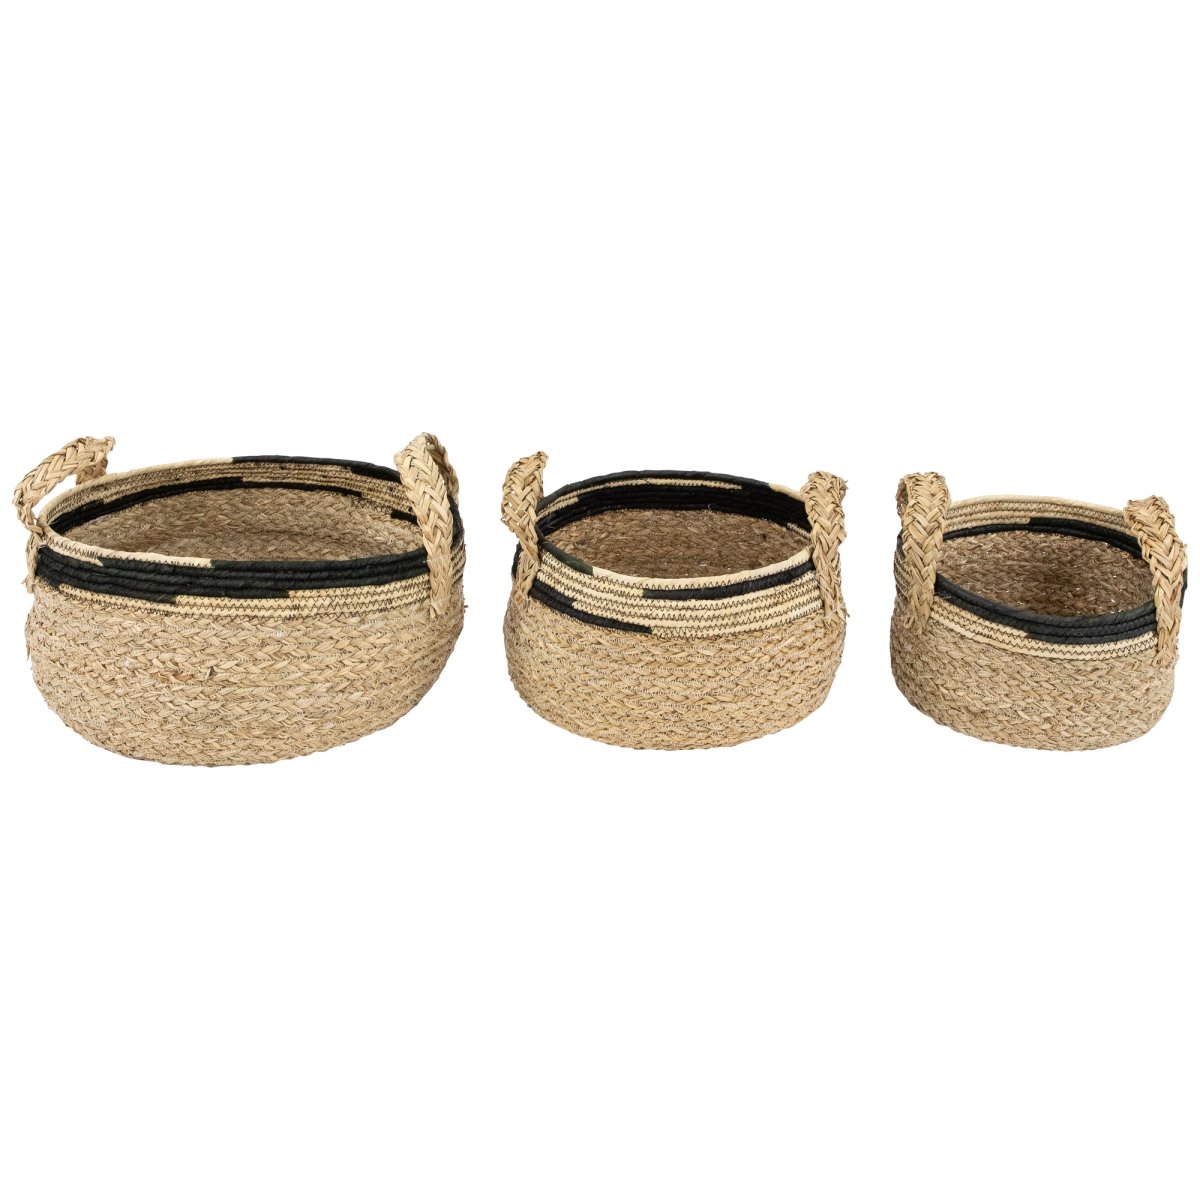 Picture of Northlight 35737408 13.75 in. Khaki & Black Braid Weave Seagrass Storage Baskets with Handles - Set of 3